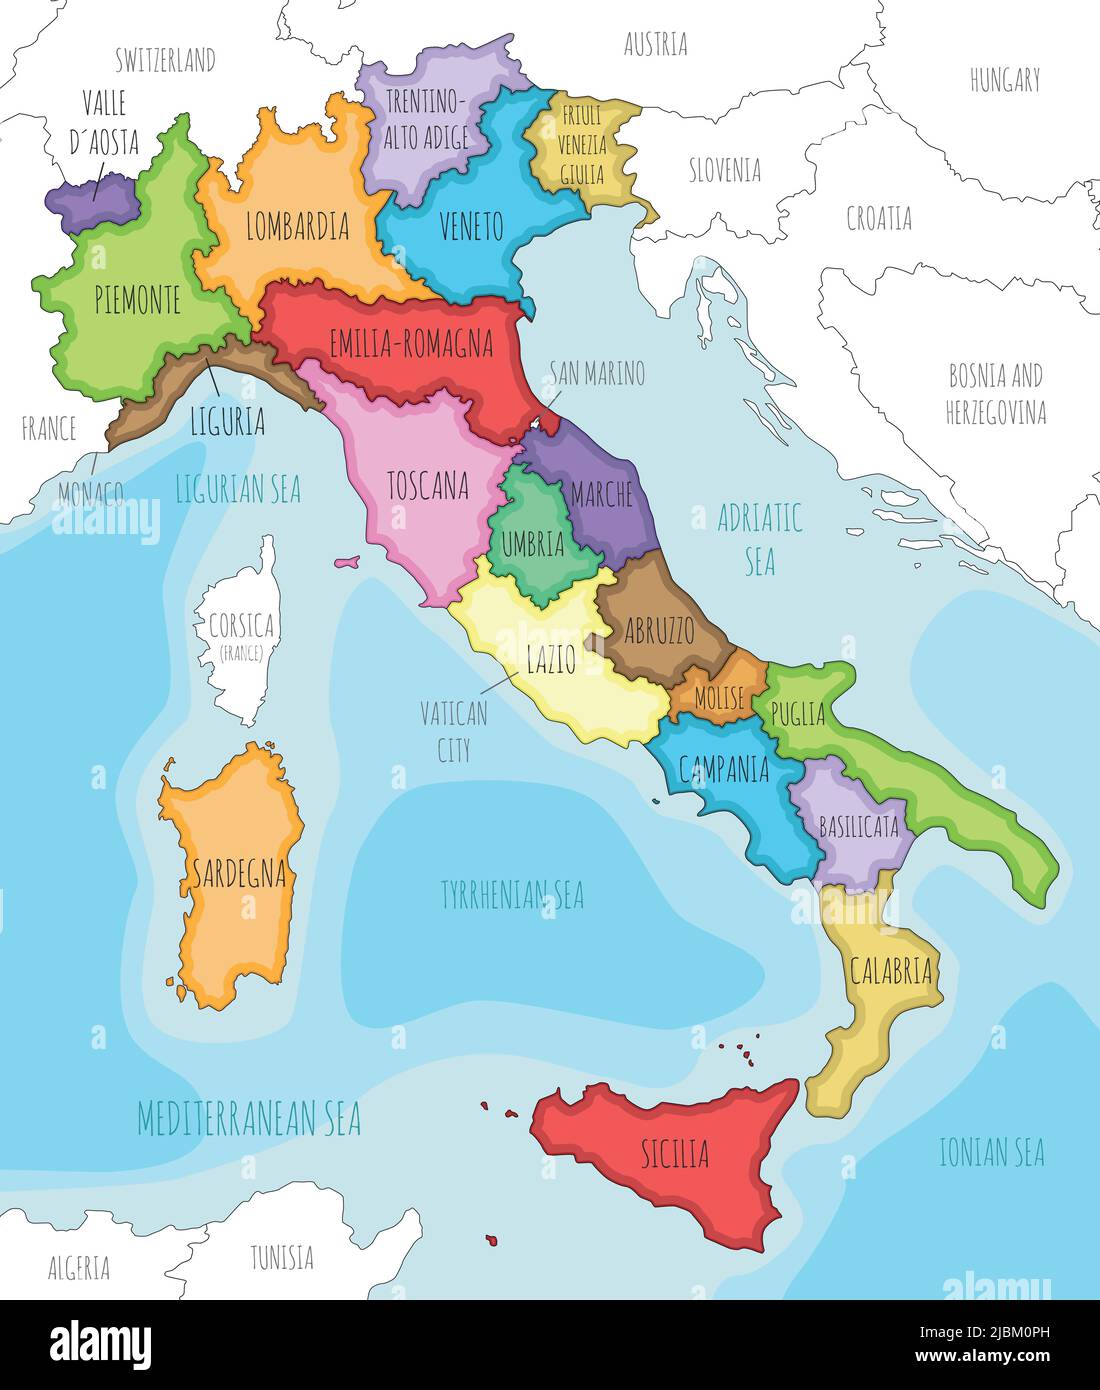 Vector illustrated map of Italy with regions and administrative divisions, and neighbouring countries and territories. Editable and clearly labeled la Stock Vector